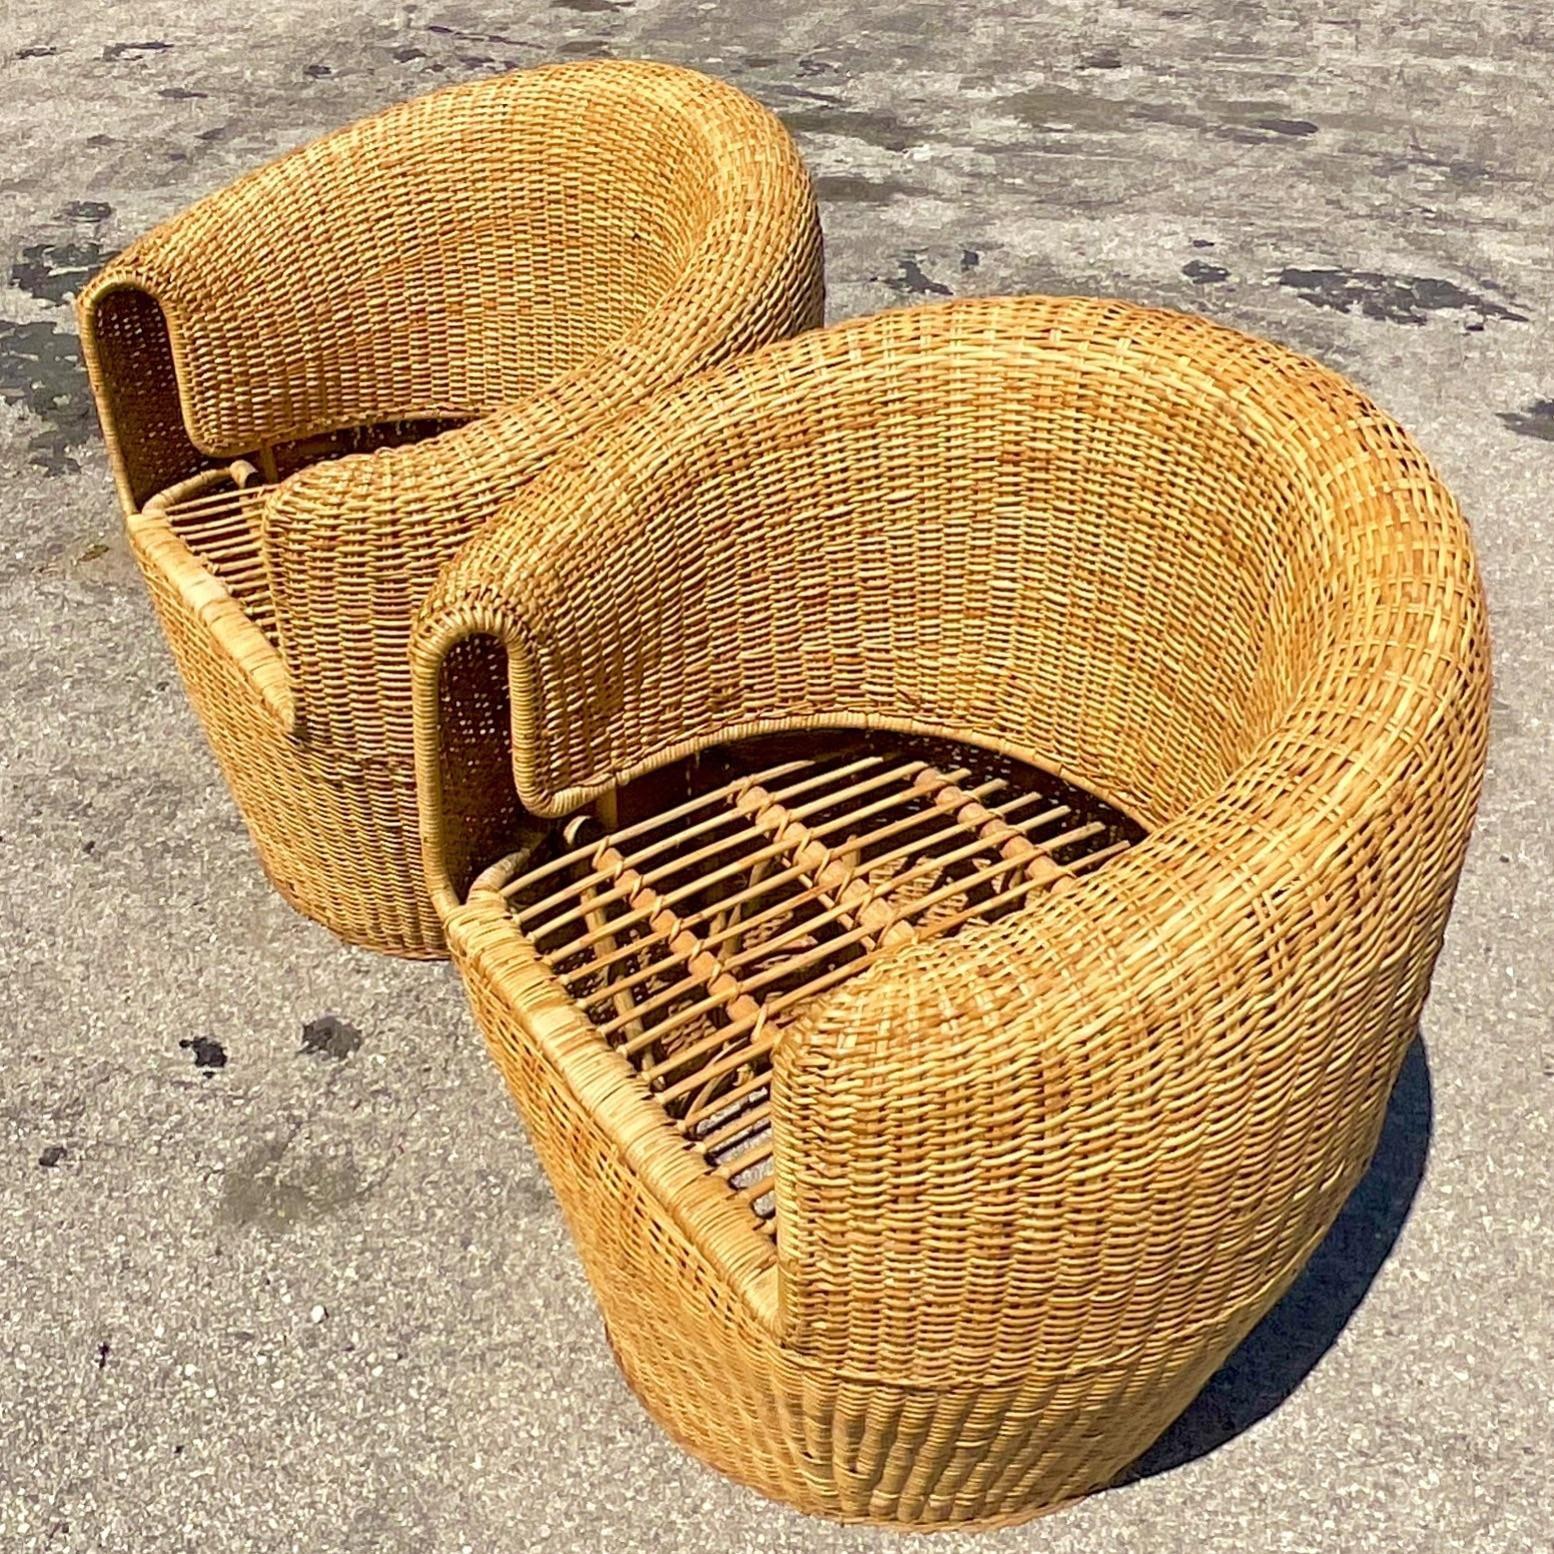 A fabulous pair of vintage Coastal Barrel chairs. Beautiful woven rattan in a chic modern shape. Acquired from a Palm Beach estate.